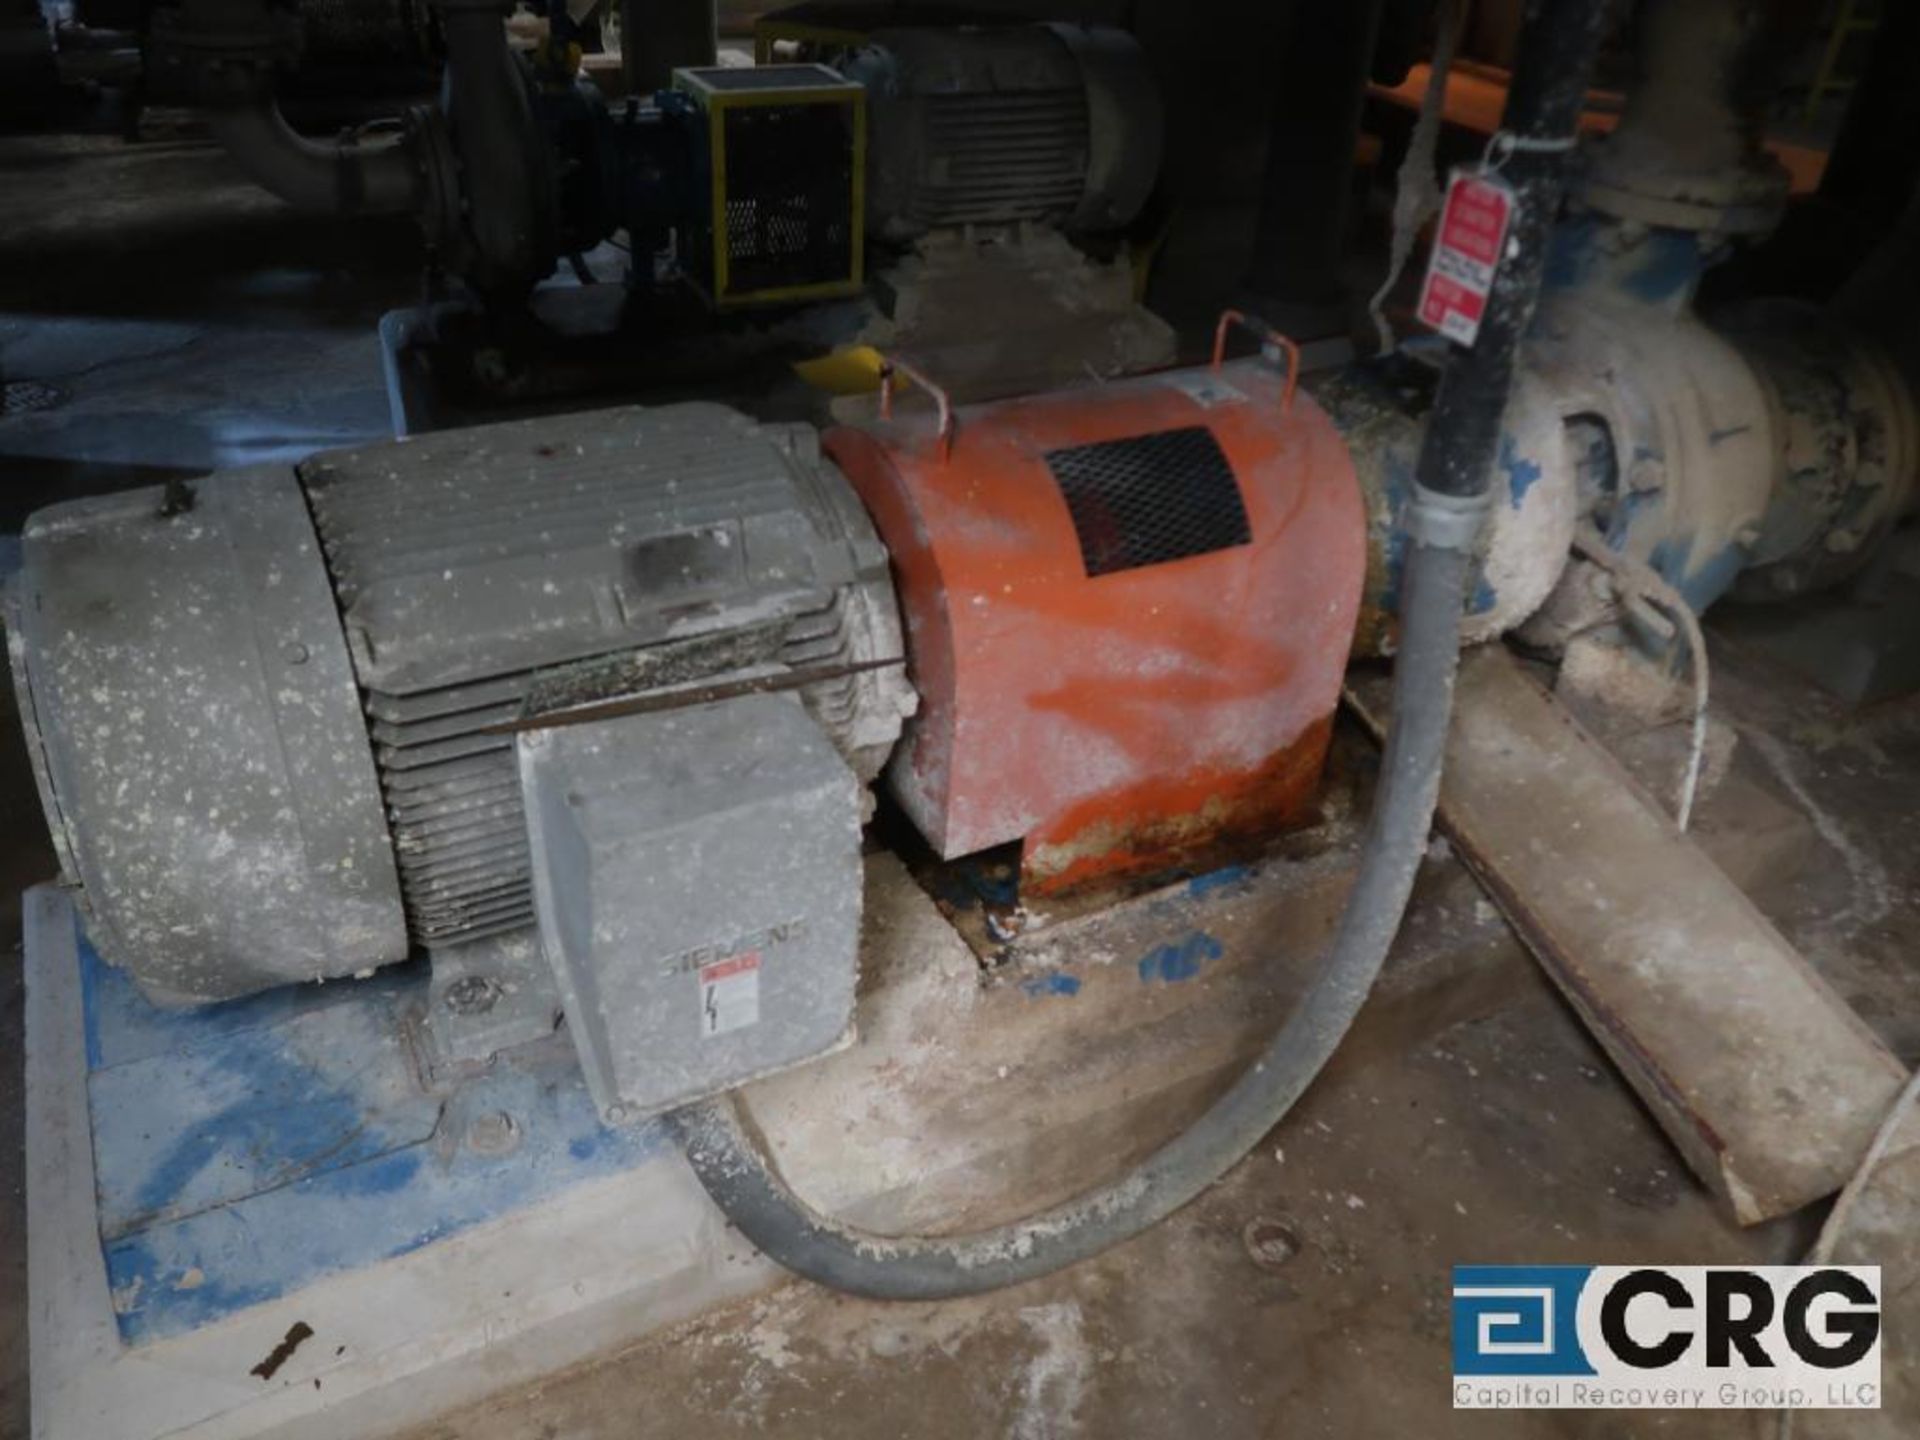 Goulds 6 X 8 centrifugal pump with 100 HP drive (Elev 530 Pulp Mill)